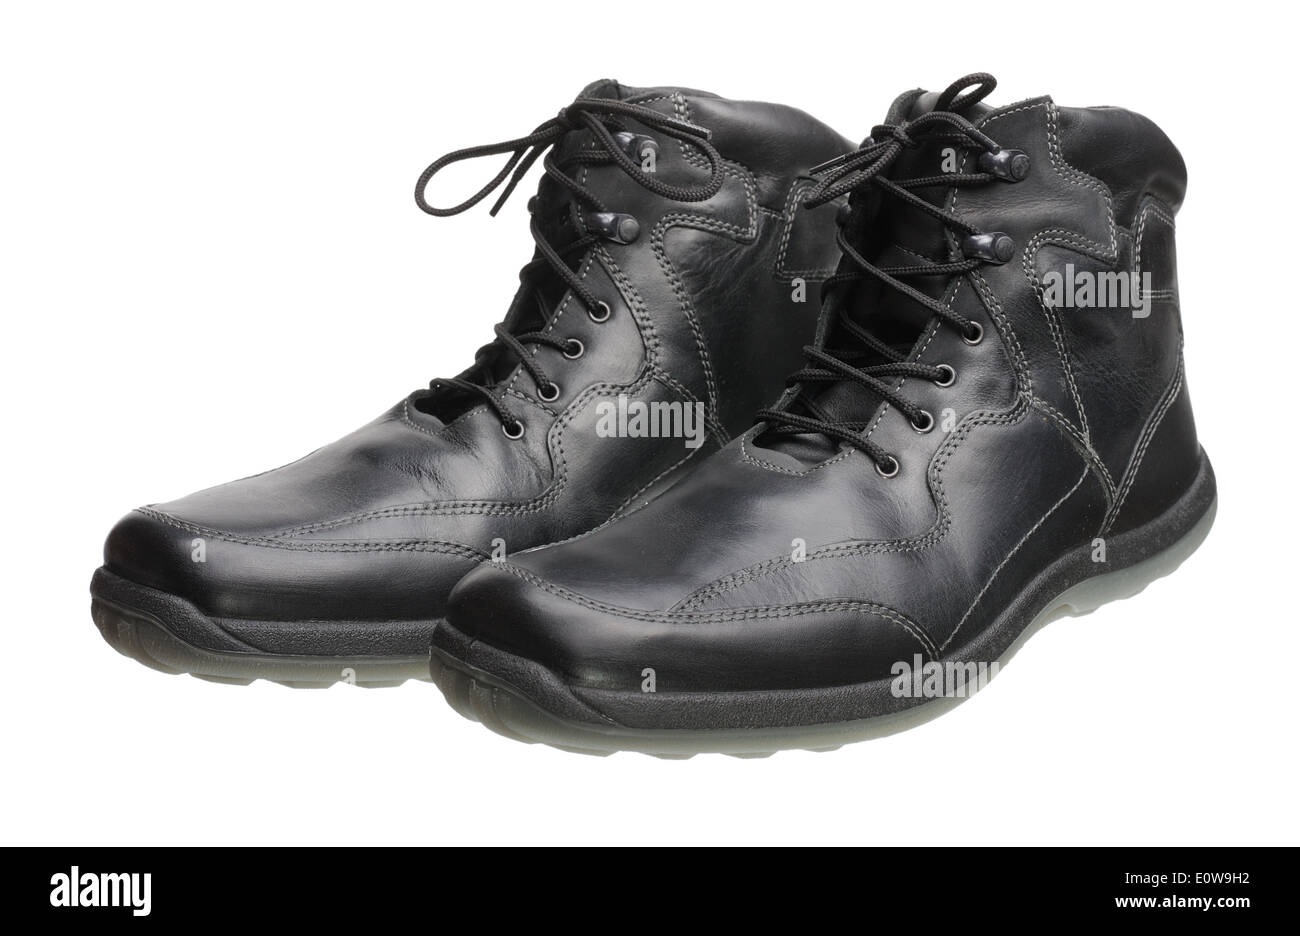 Men black leather shoes with laces, isolated on a white background. Stock Photo